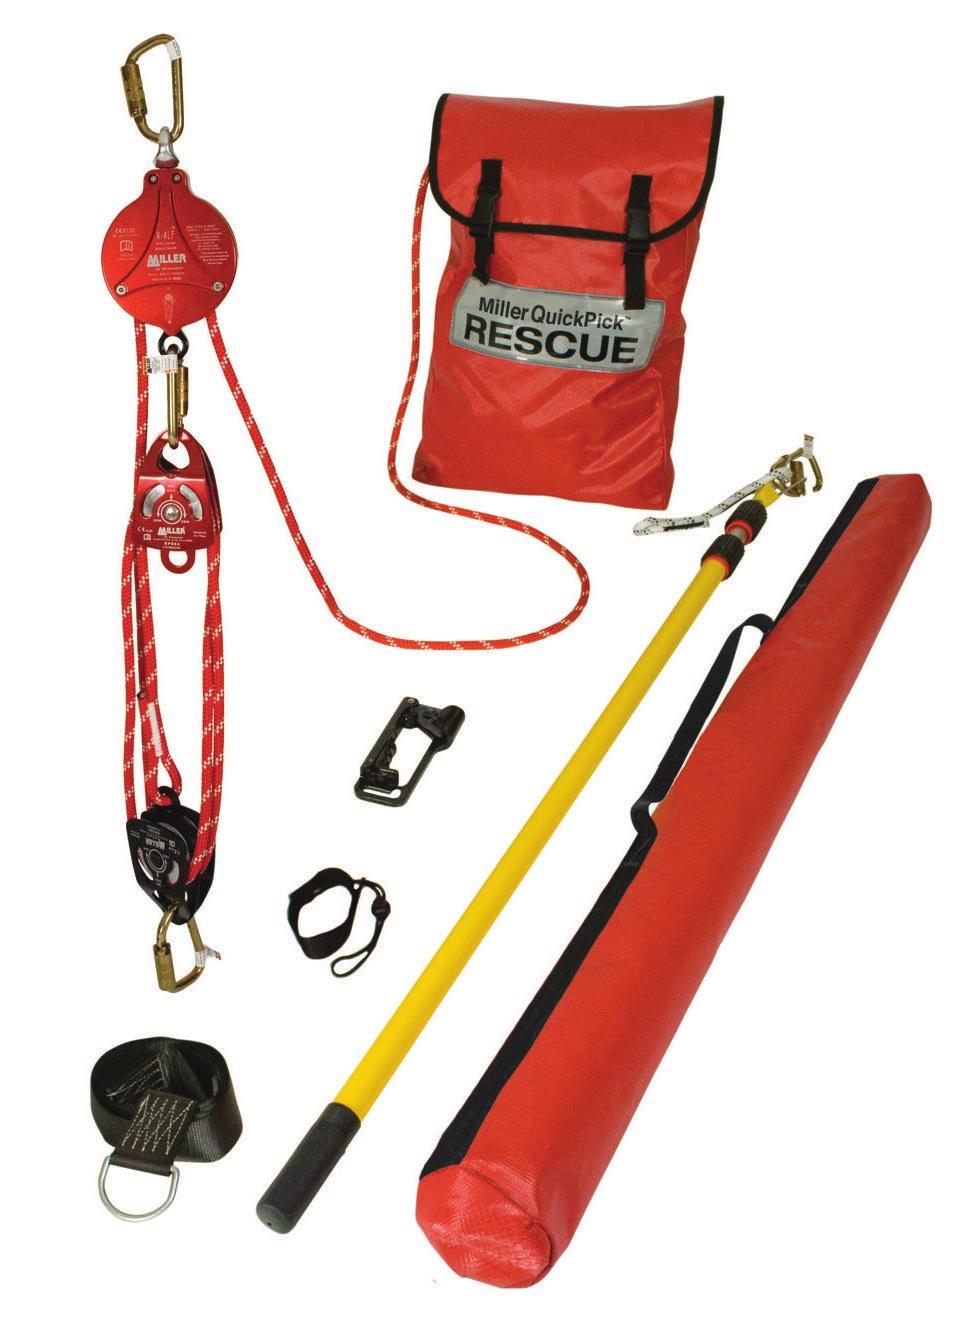 SafEscape Wind Energy Kit includes Miller SafEscape ELITE RDD with hoisting wheel and ladder bracket, T-bar, edge protector, 3 anchor slings, 3 carabiners, pulley, adjustable rope anchor, rescue rope